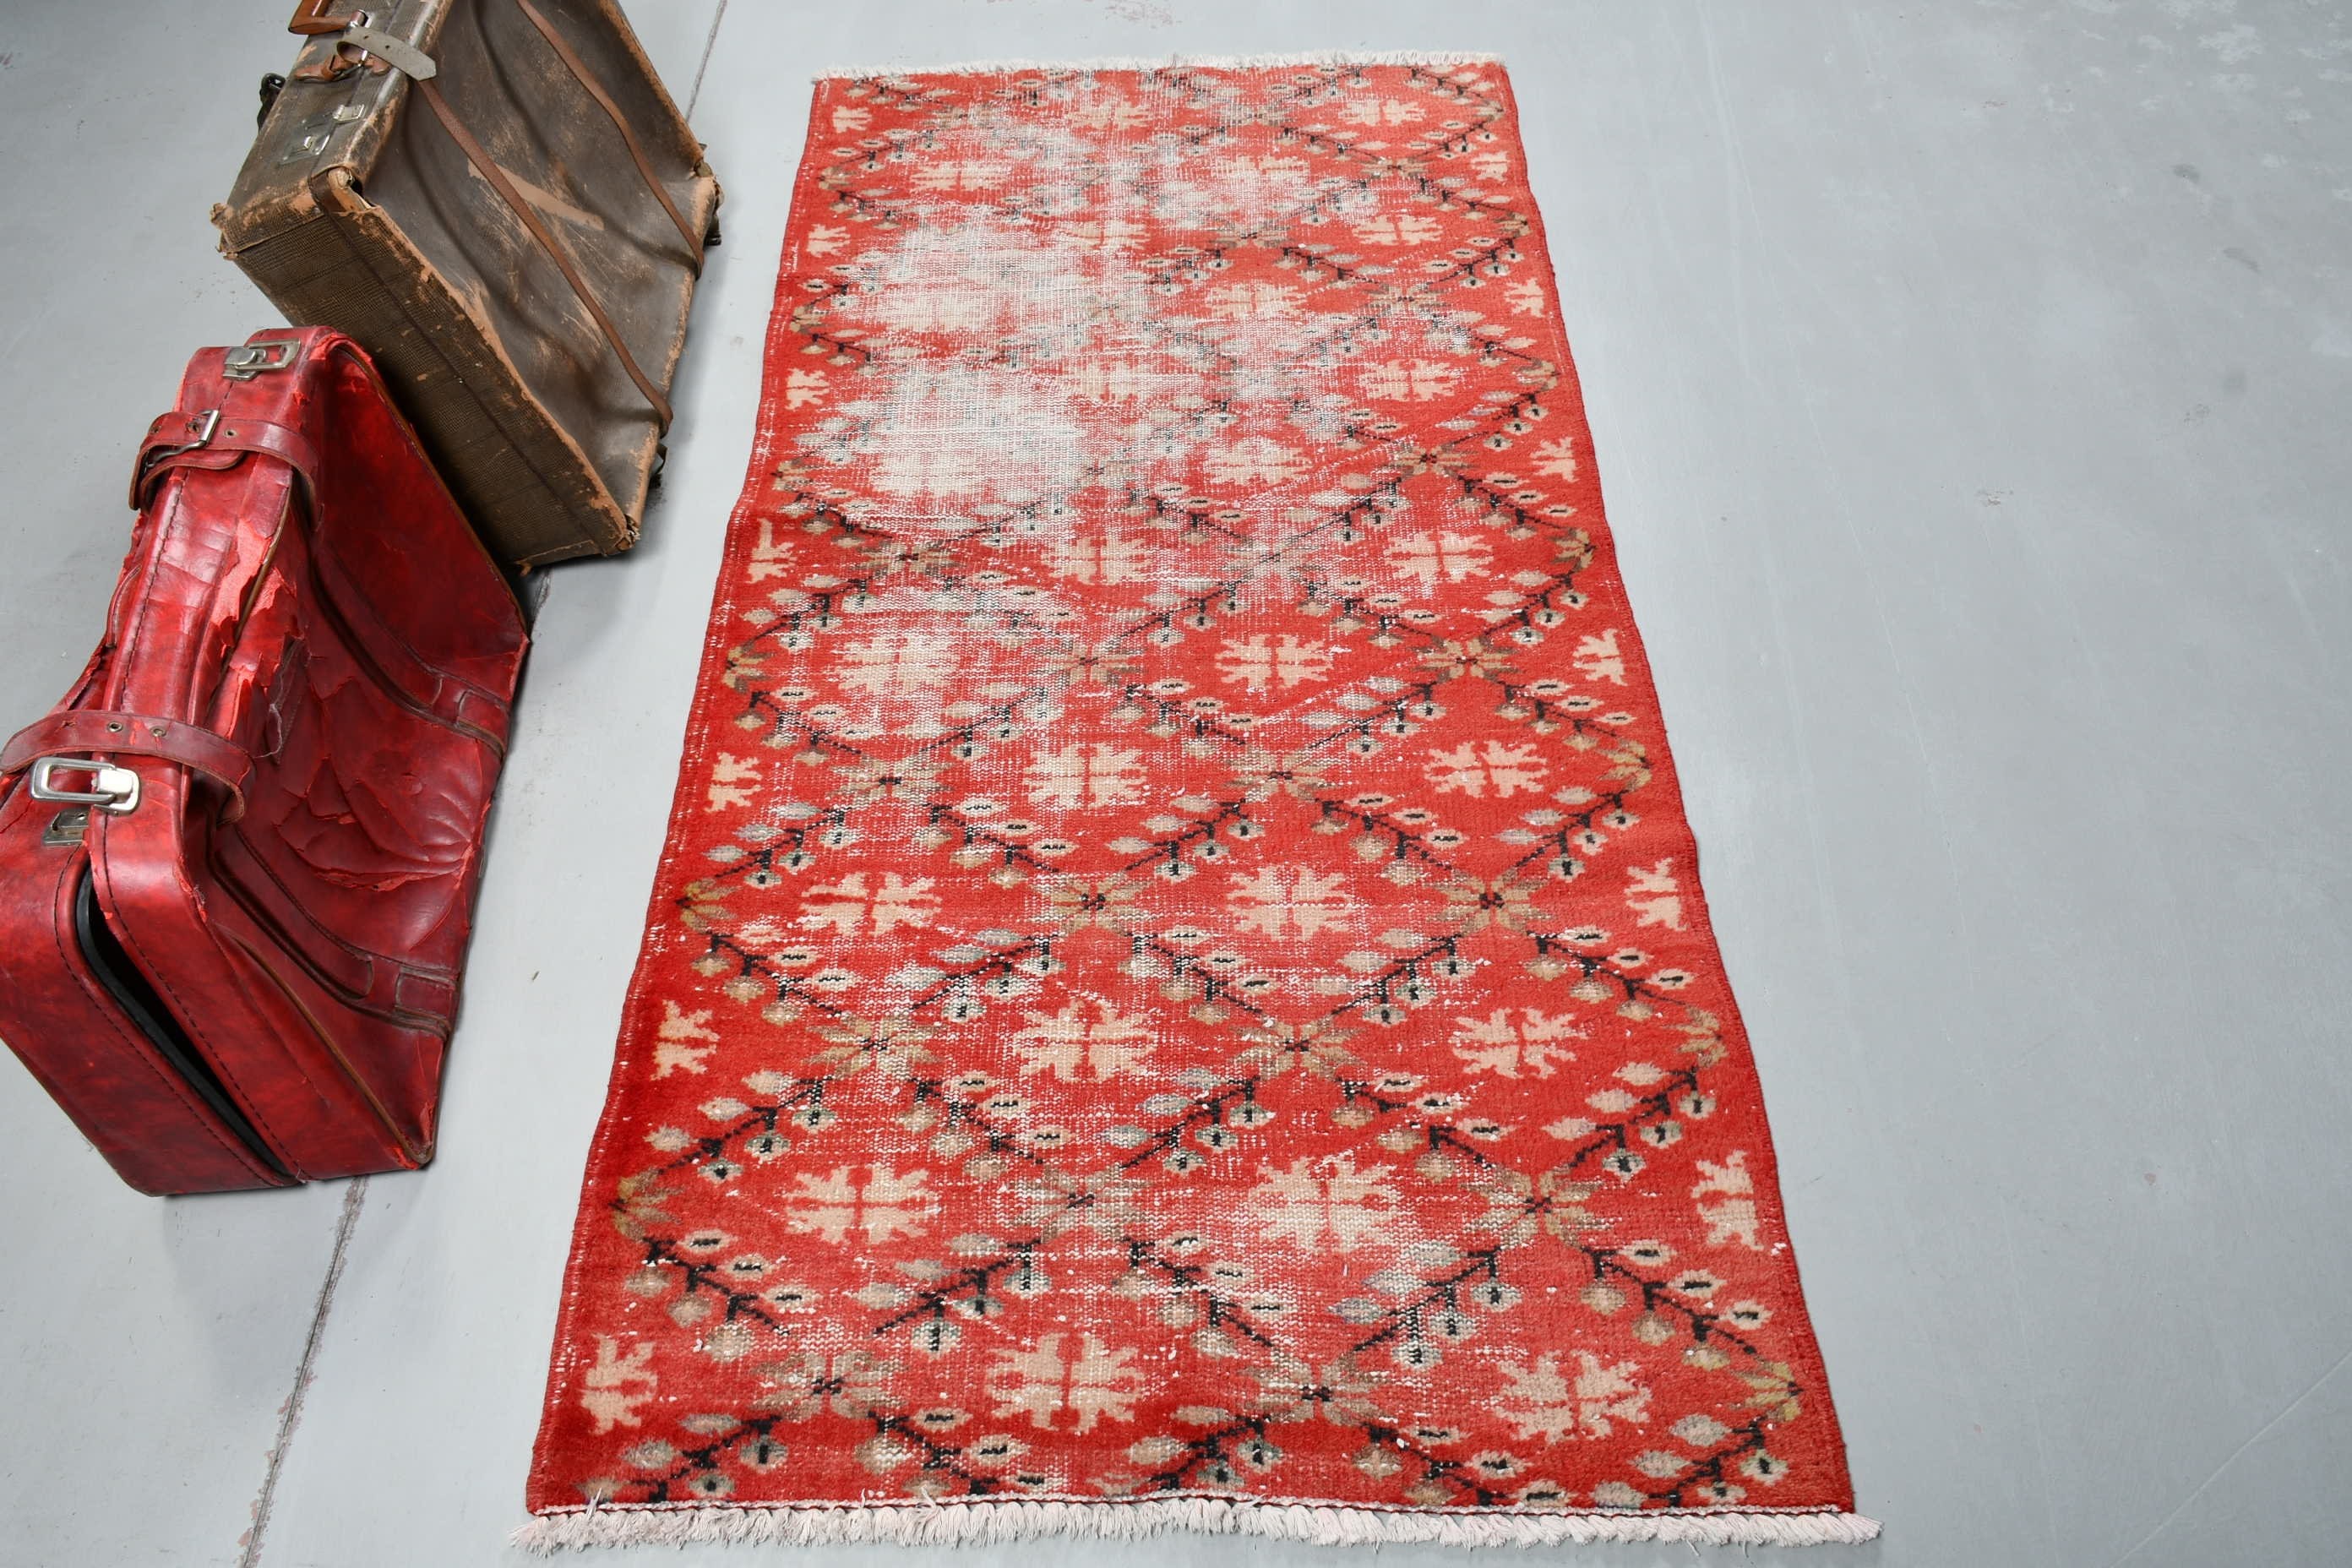 Red Home Decor Rugs, Kitchen Rug, Turkish Rugs, Moroccan Rug, Rugs for Bedroom, Vintage Rug, Floor Rug, Entry Rugs, 3.1x6.5 ft Accent Rugs